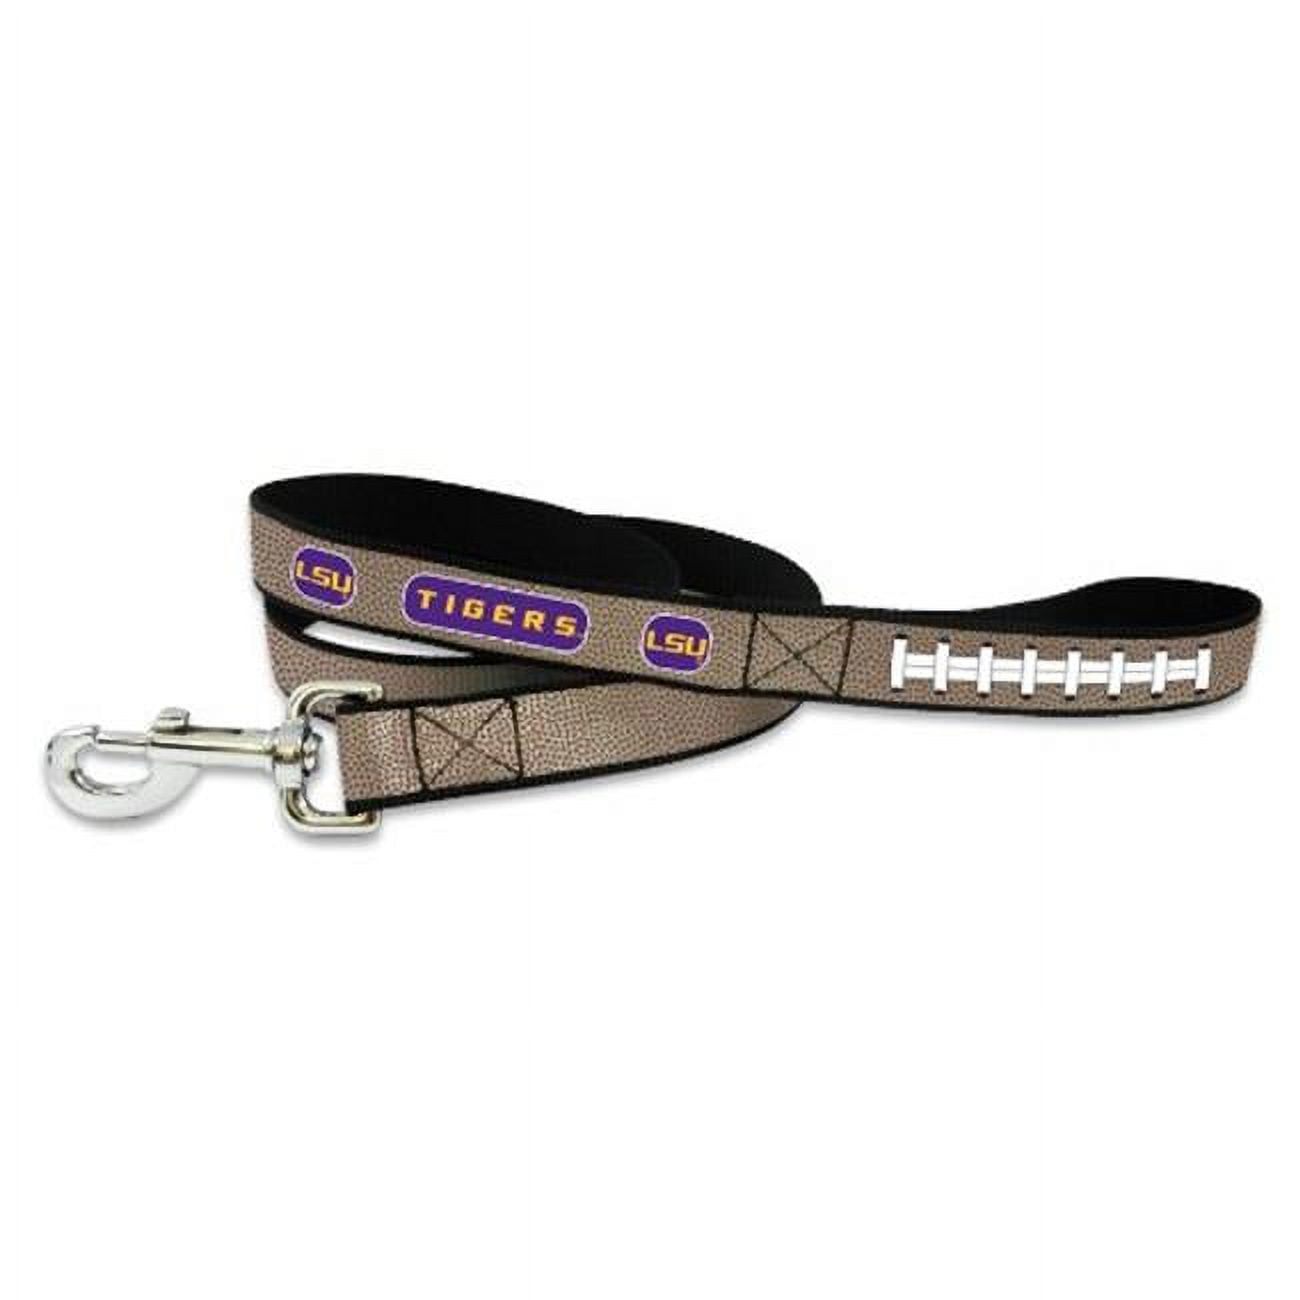 Picture of Gamewear 4421406827 LSU Tigers Reflective Football Alternate Pet Leash - Large